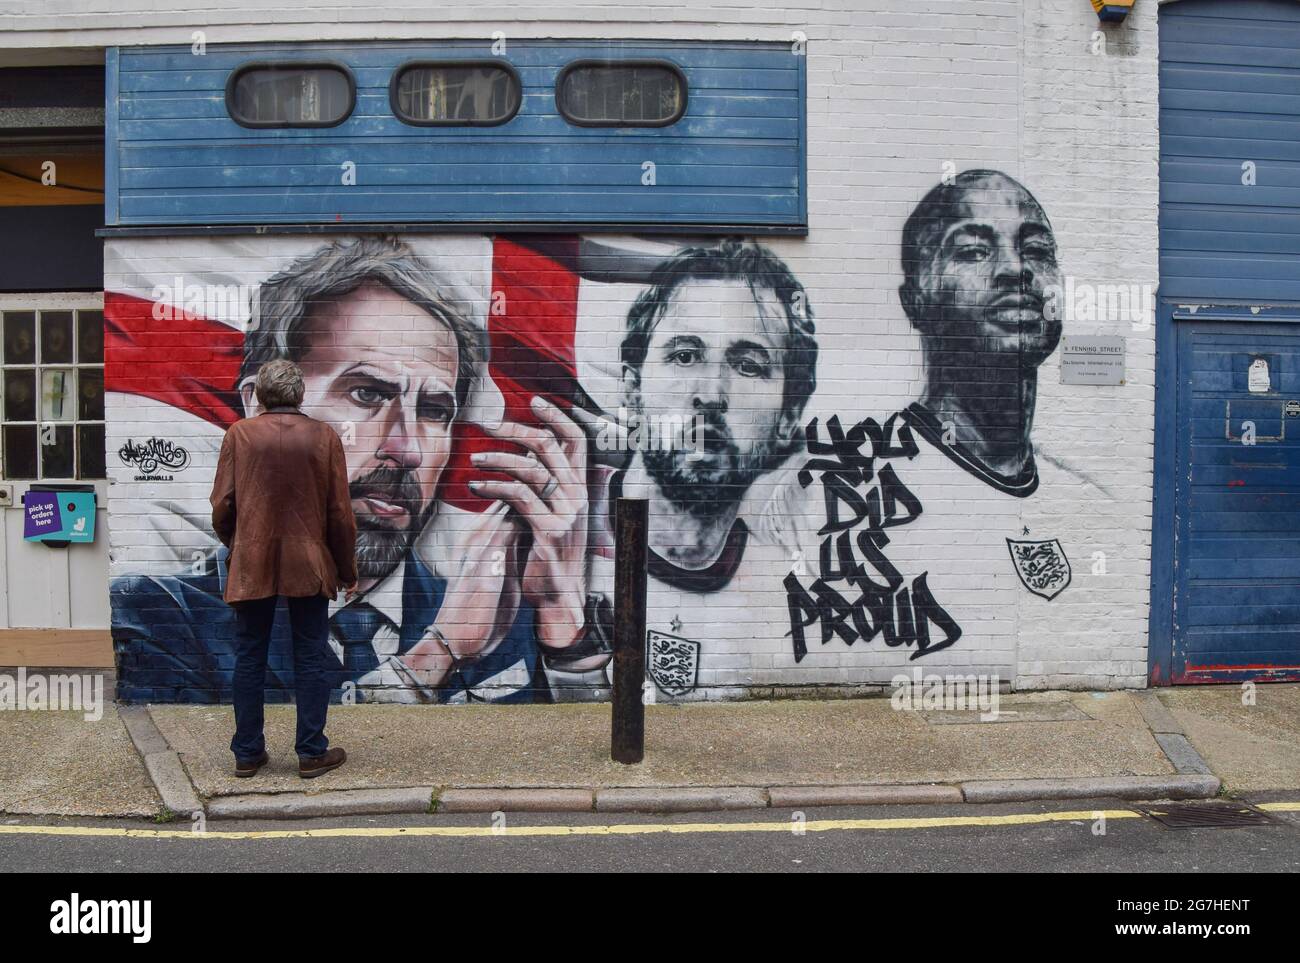 London, UK. 14th July, 2021. A man admires the mural of England football manager Gareth Southgate and players Harry Kane and Raheem Sterling, with the words 'You Did Us Proud', is seen on a wall at Vinegar Yard in London. The mural was painted by MurWalls following the England football team's achievement of making it to the final of Euro 2020. Credit: SOPA Images Limited/Alamy Live News Stock Photo